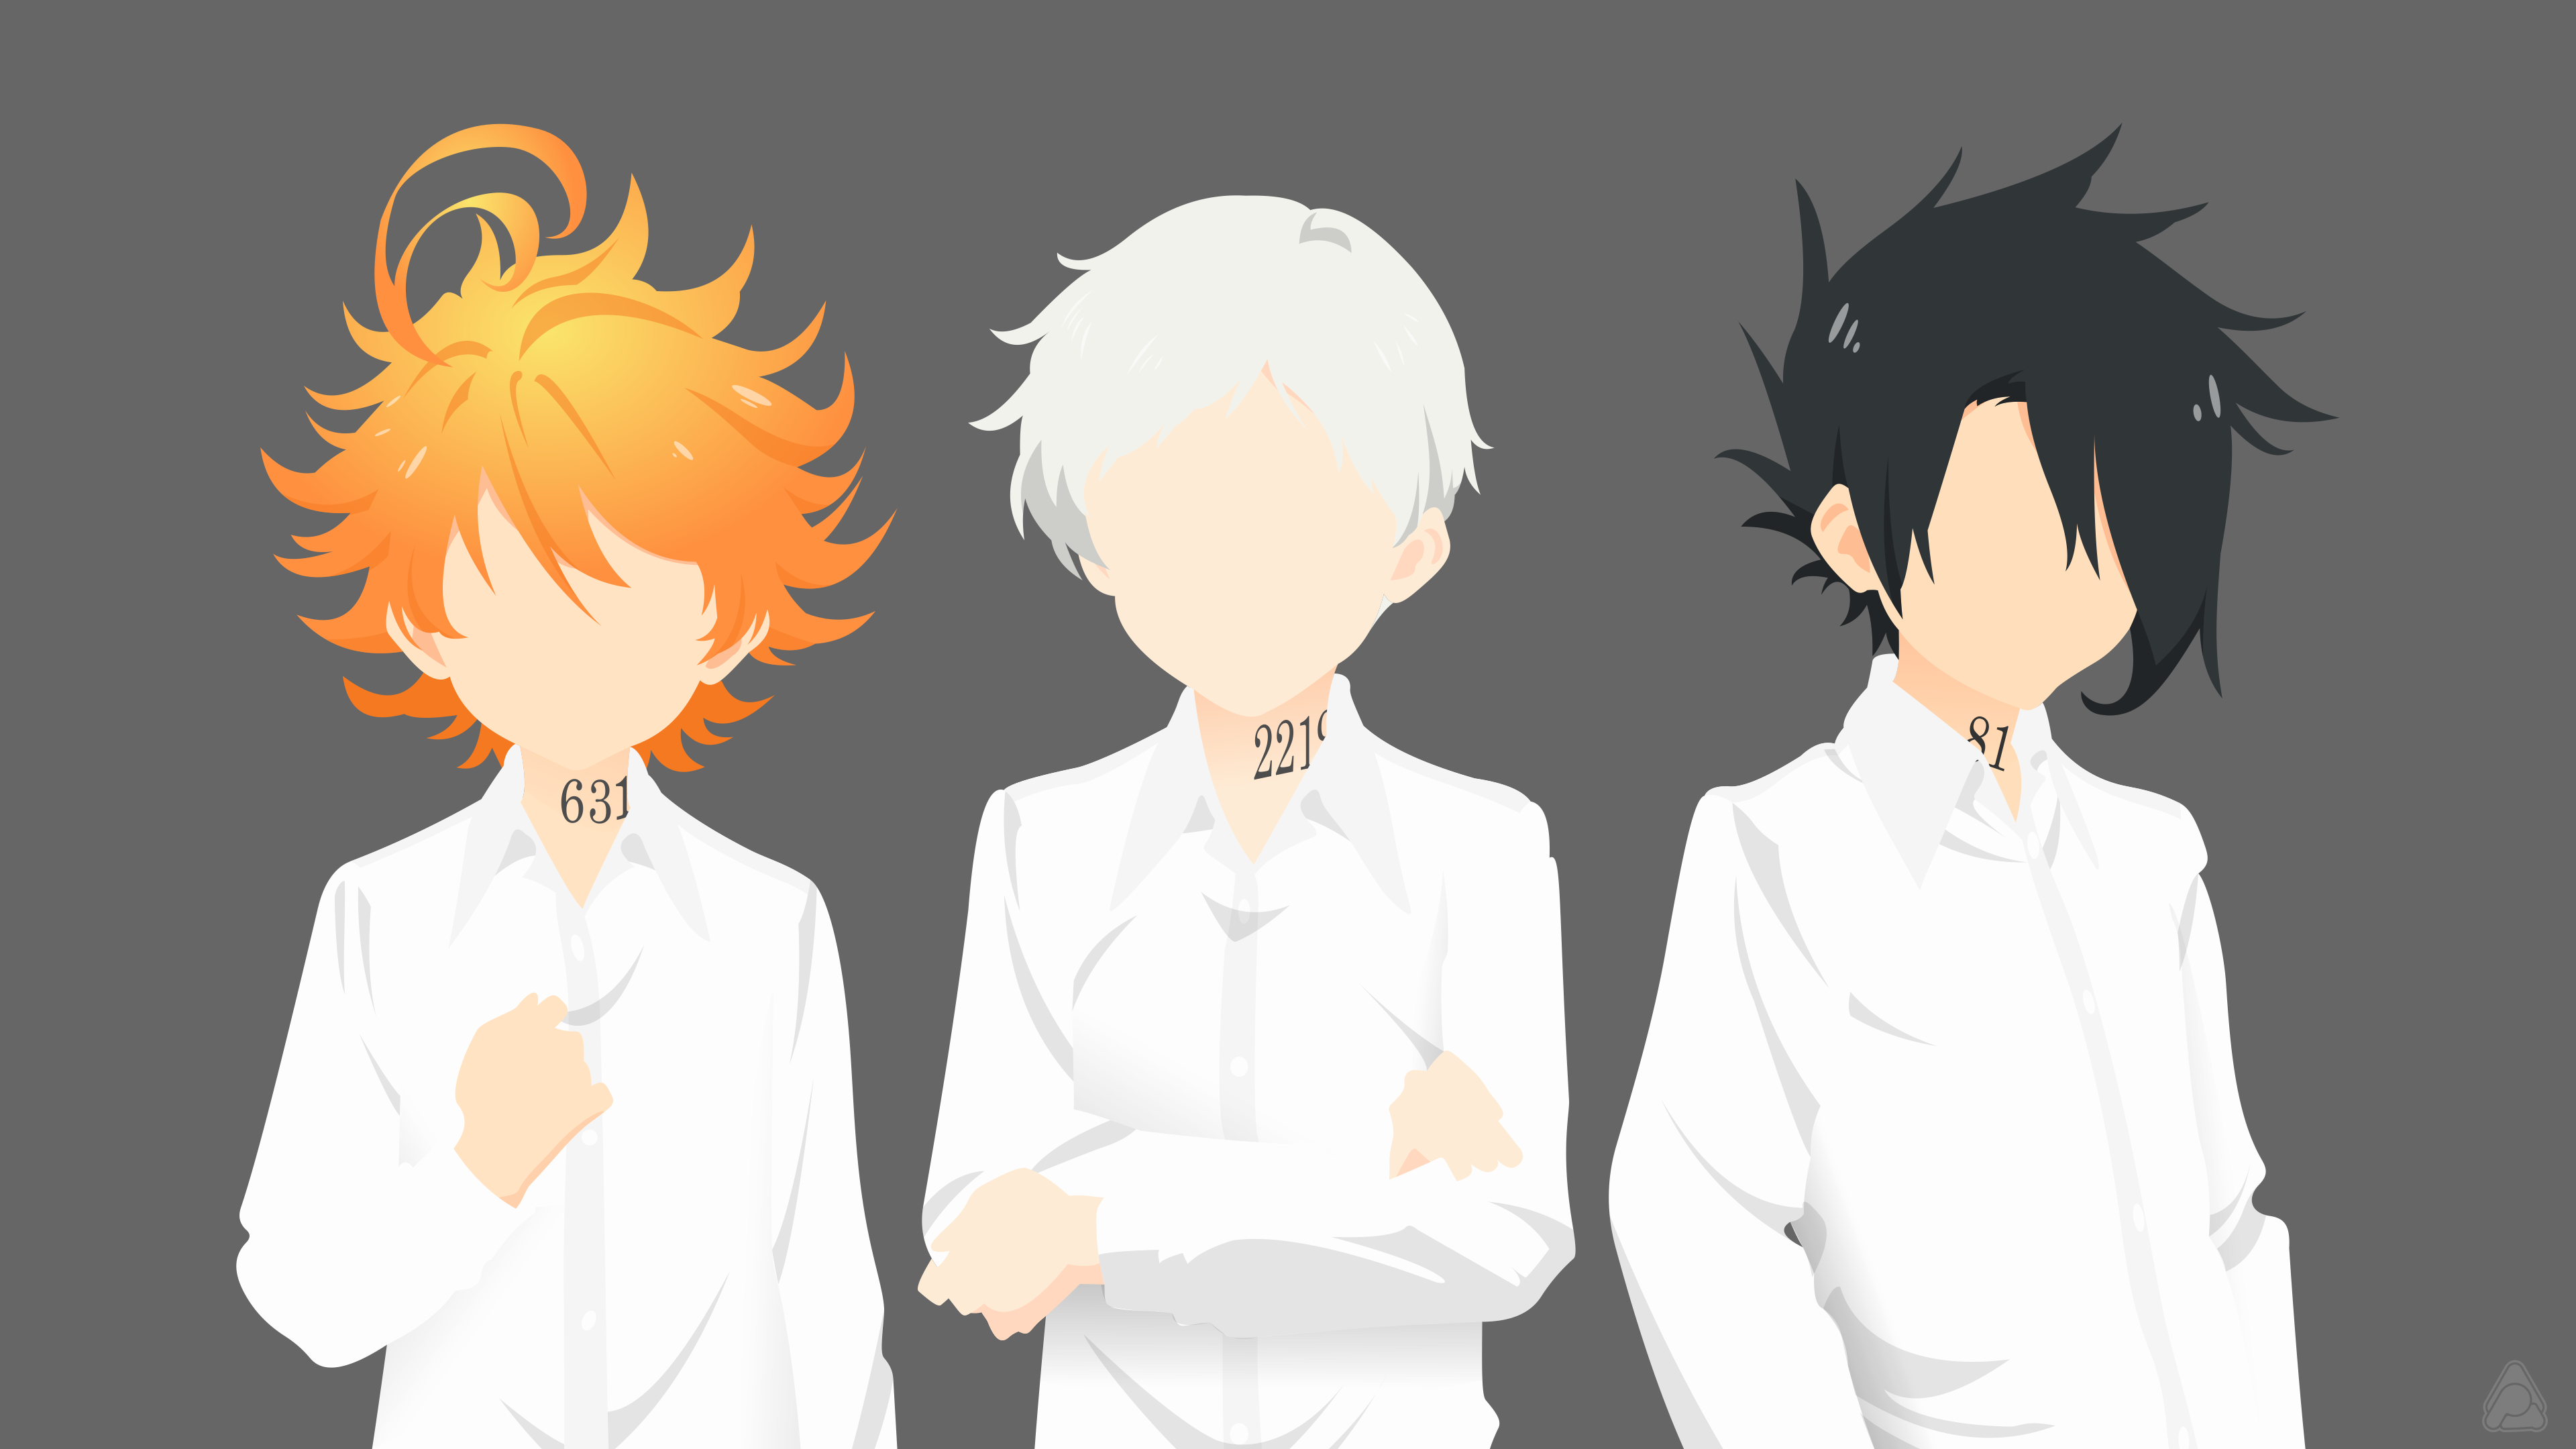 Anime 3840x2160 The Promised Neverland Emma (The Promised Neverland) Norman (The Promised Neverland) Ray (The Promised Neverland)